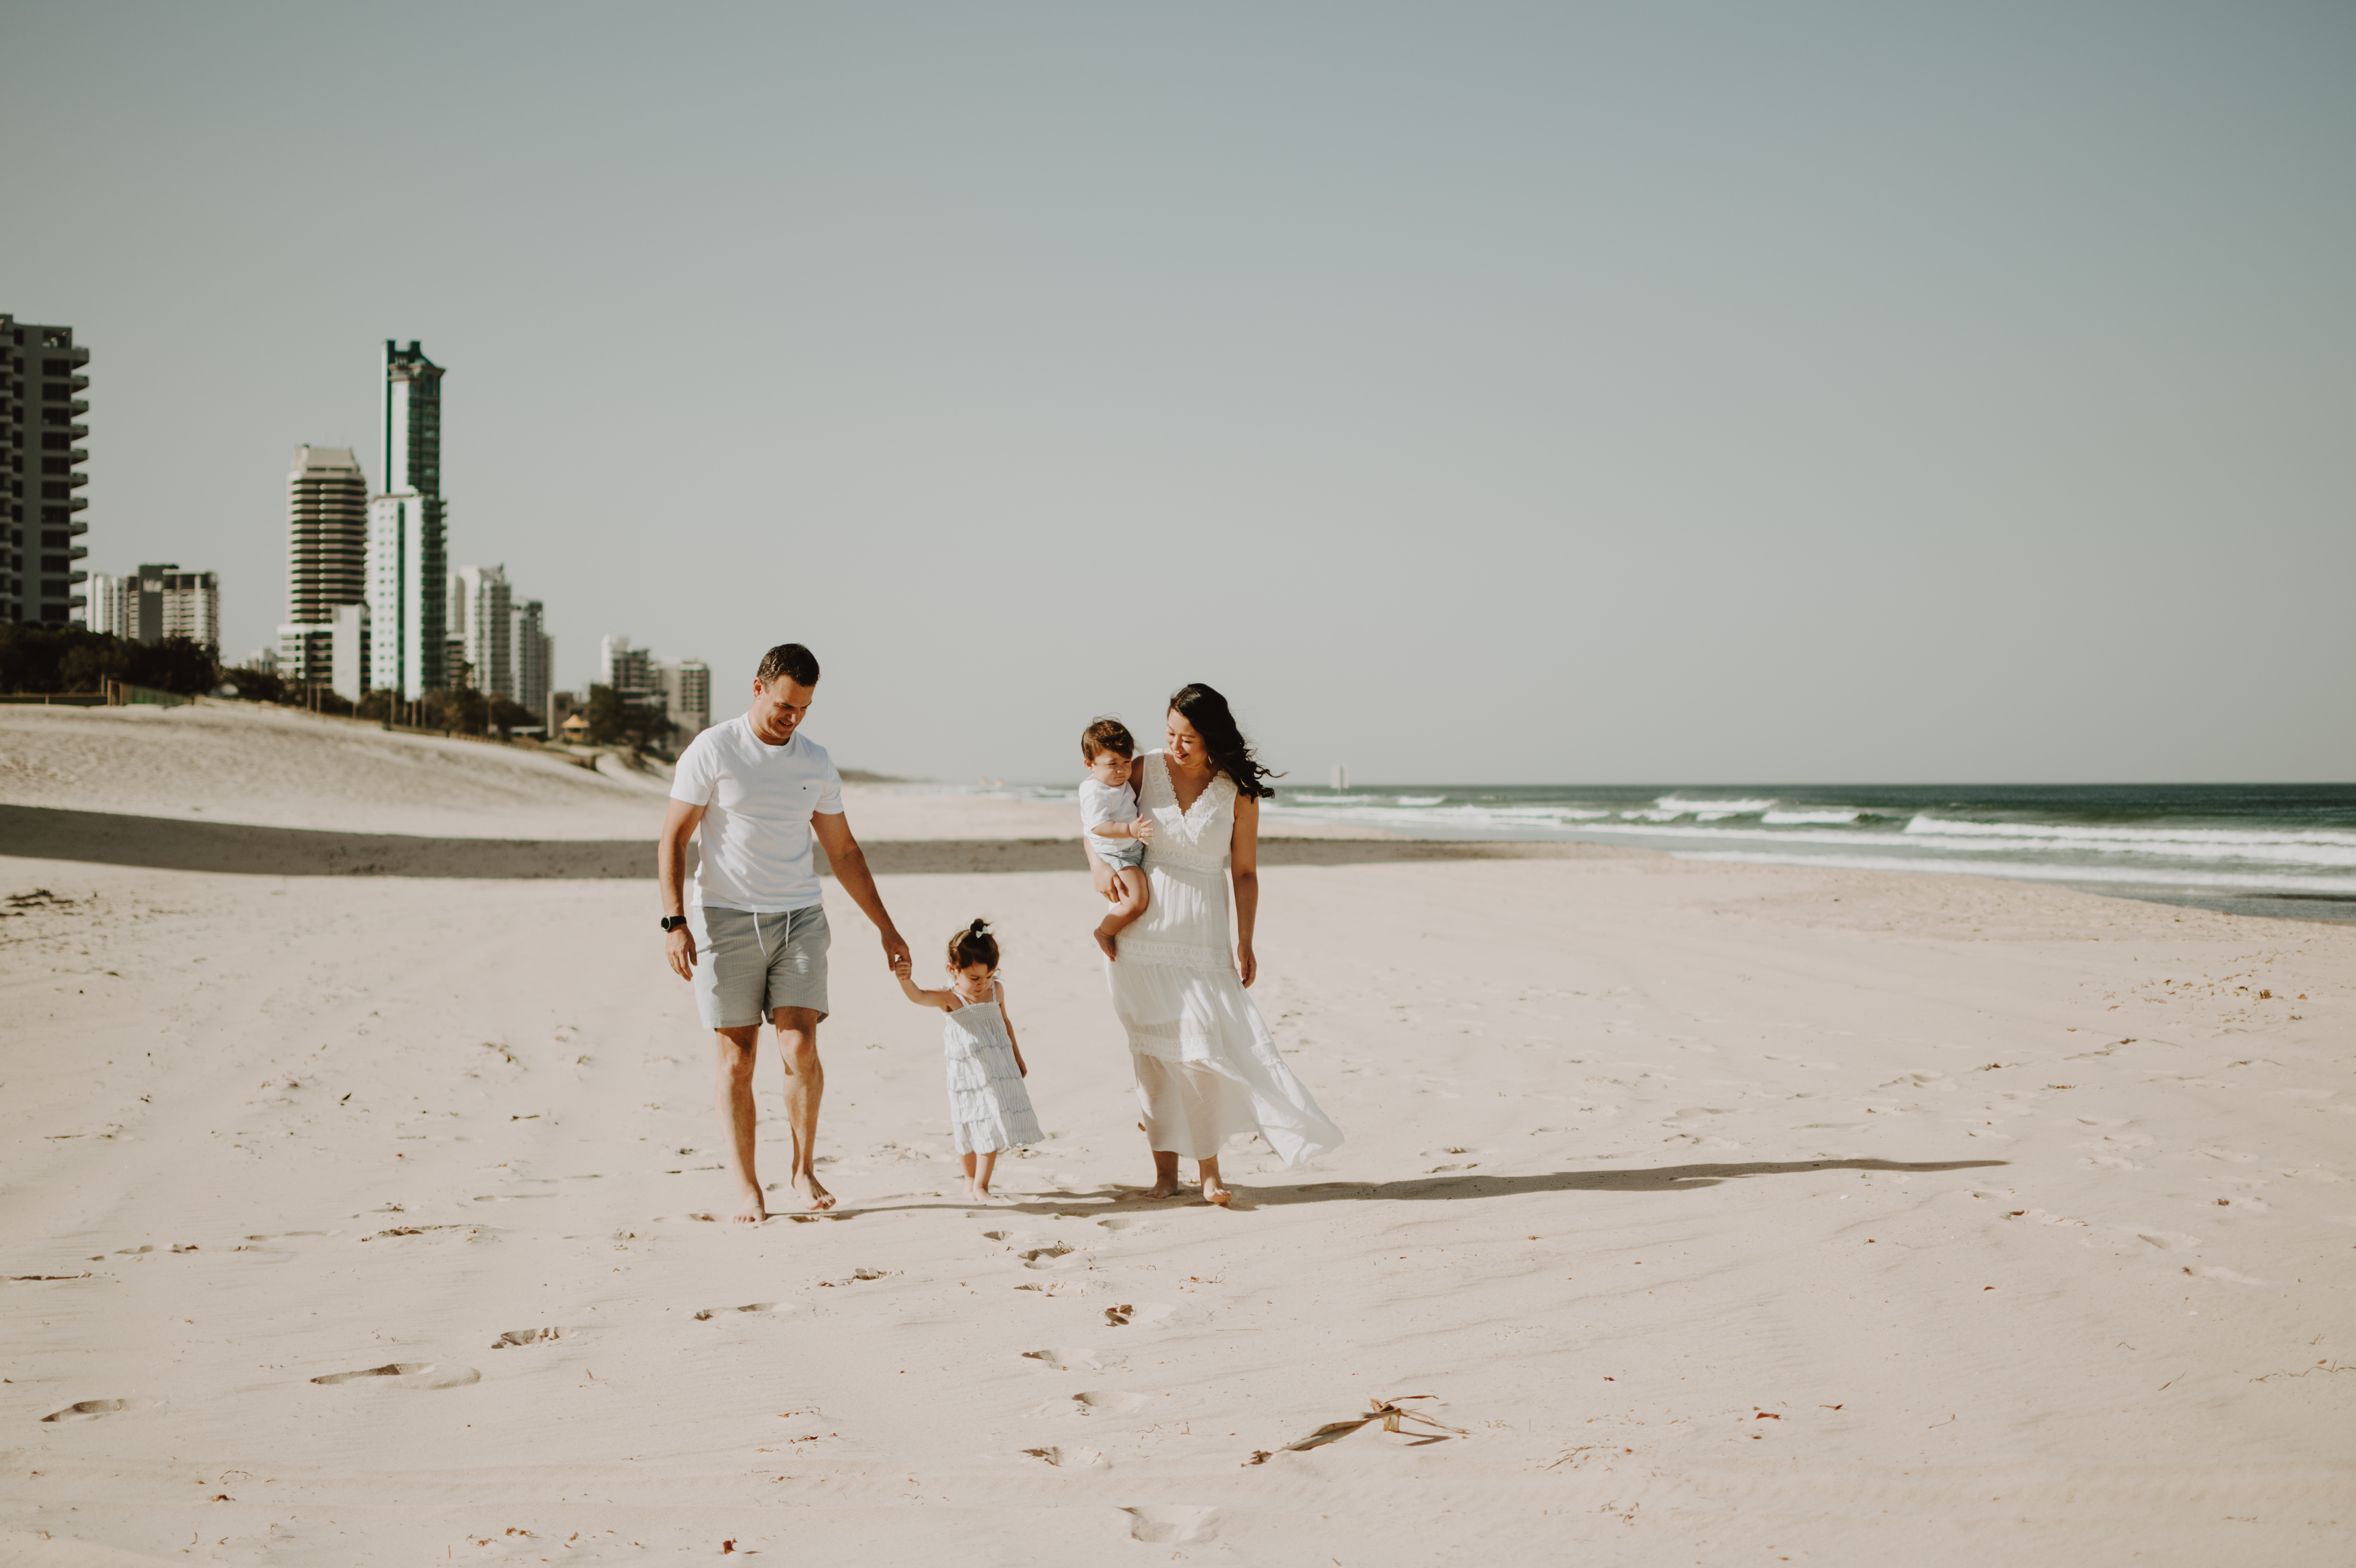 A family walks on Surfers Paradise Beach in the Gold Coast on a sunny day.